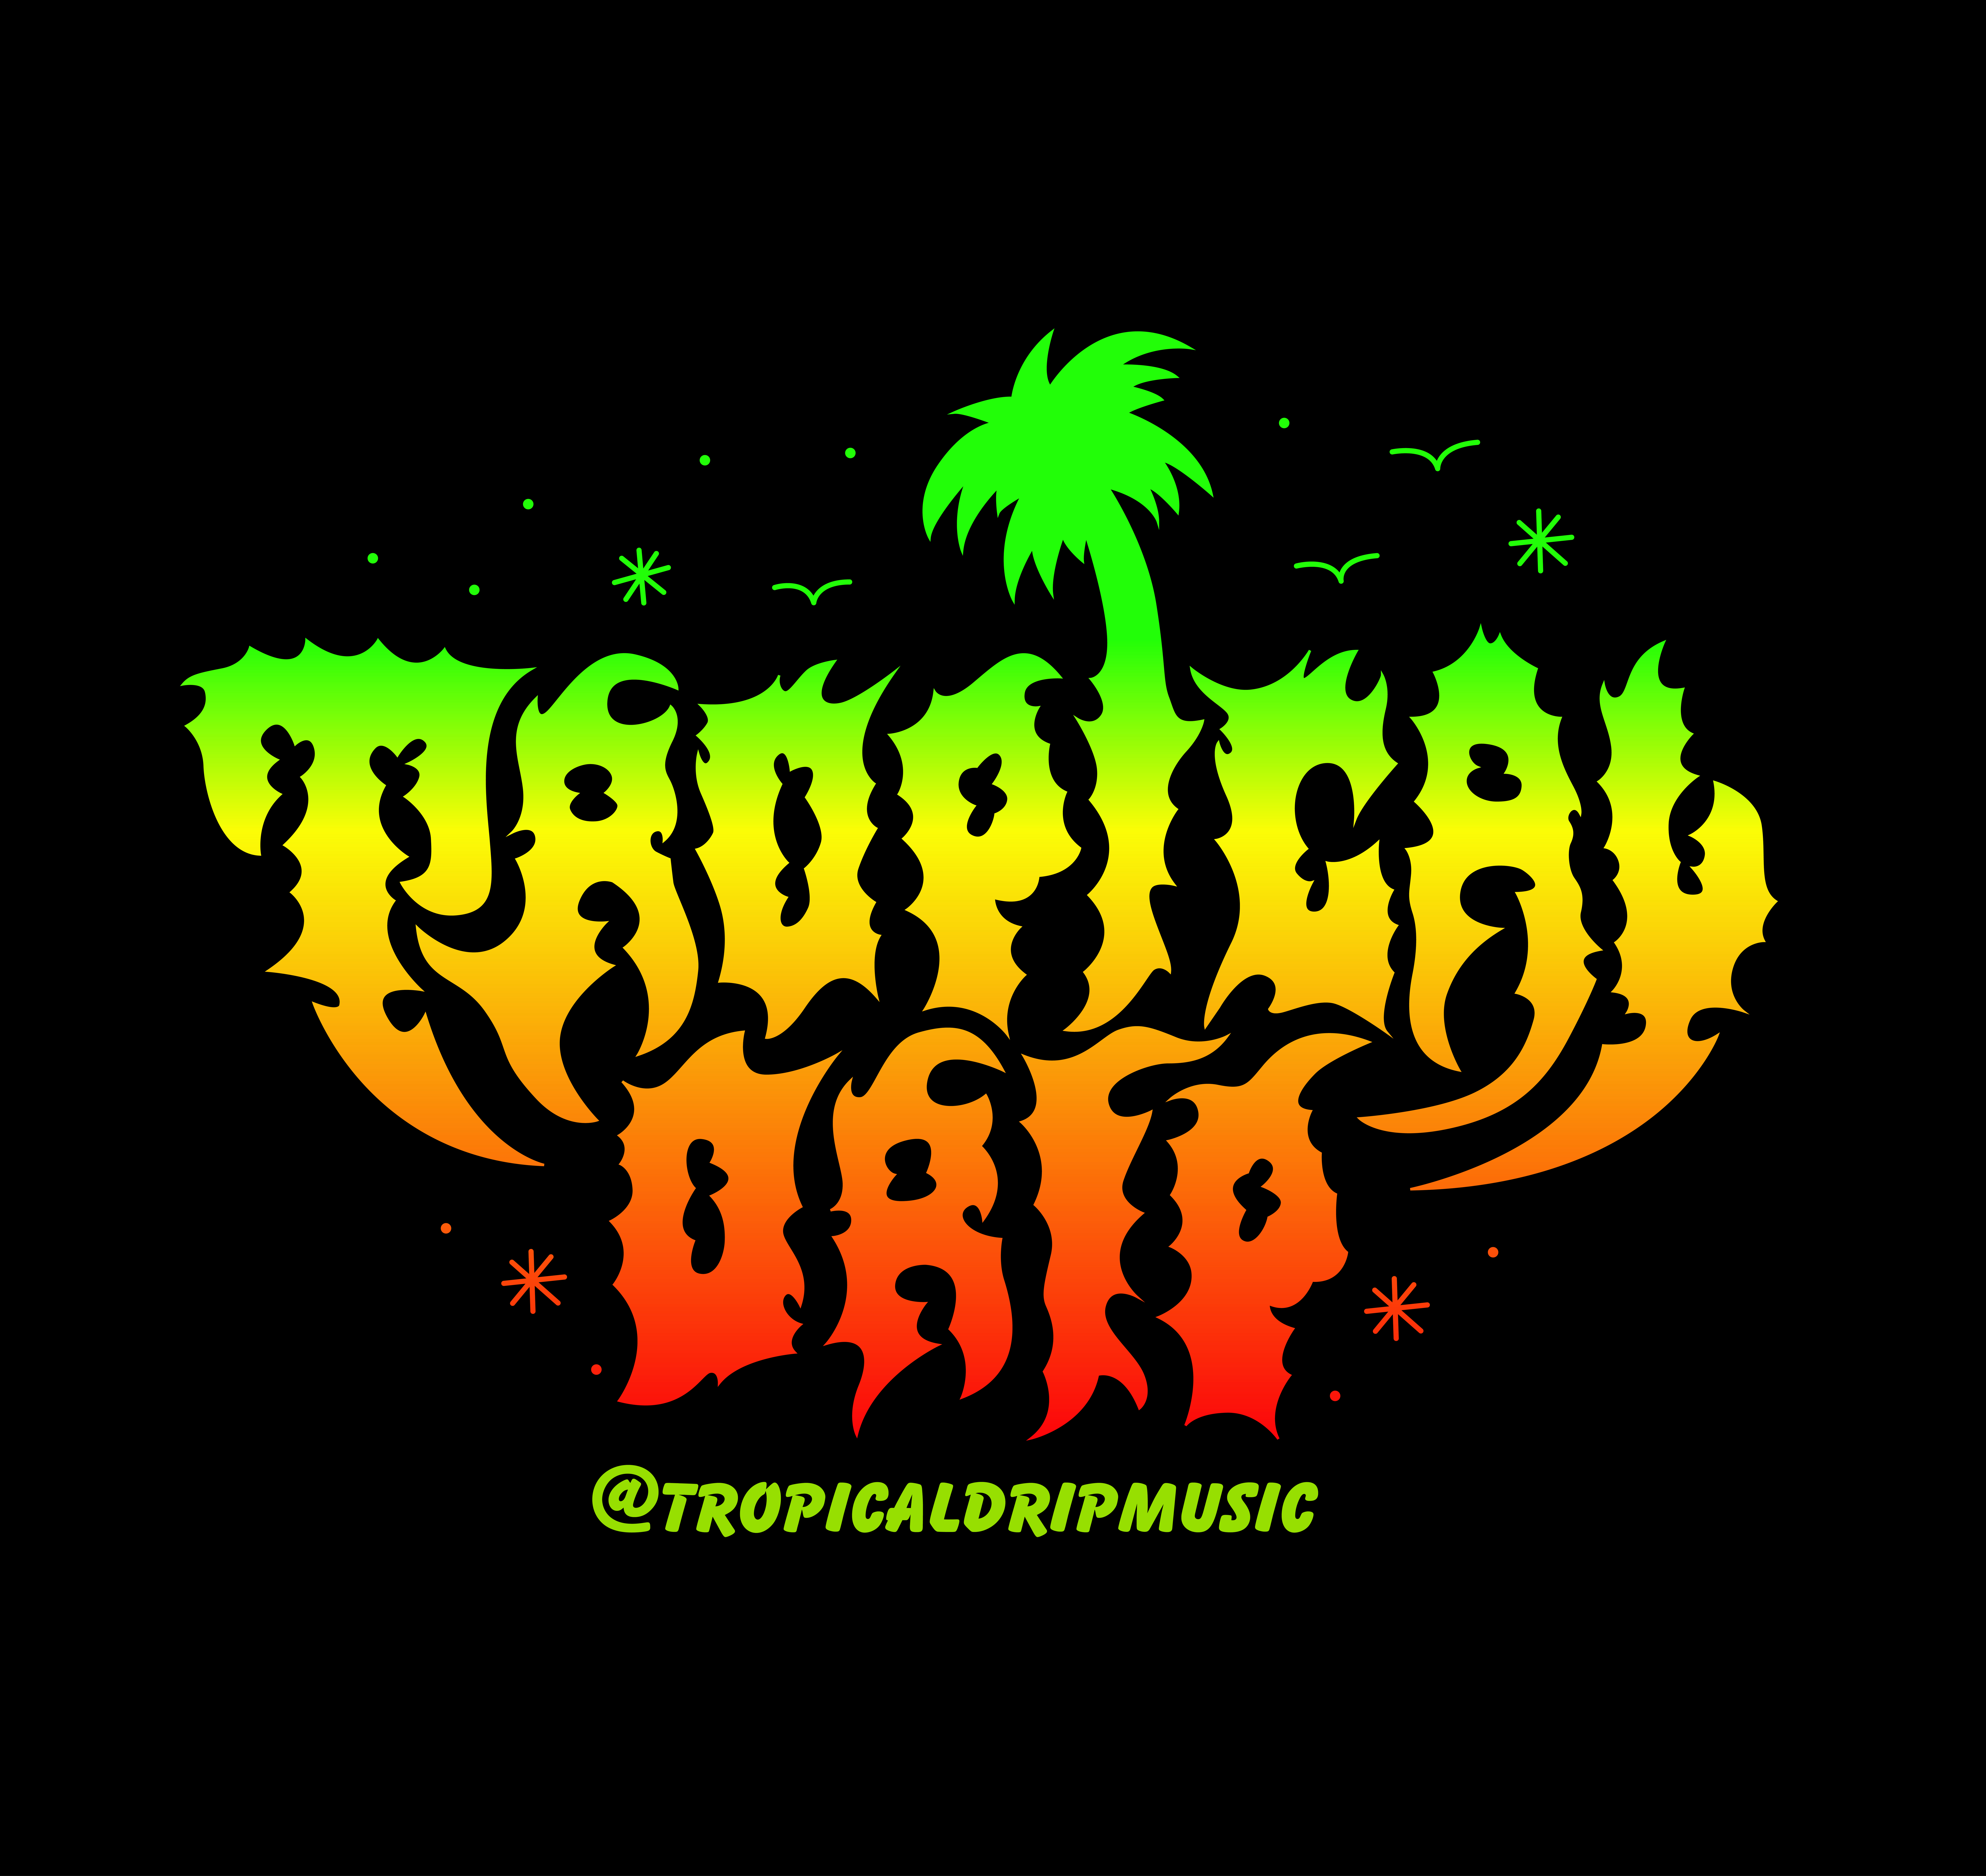 About Tropical Drip